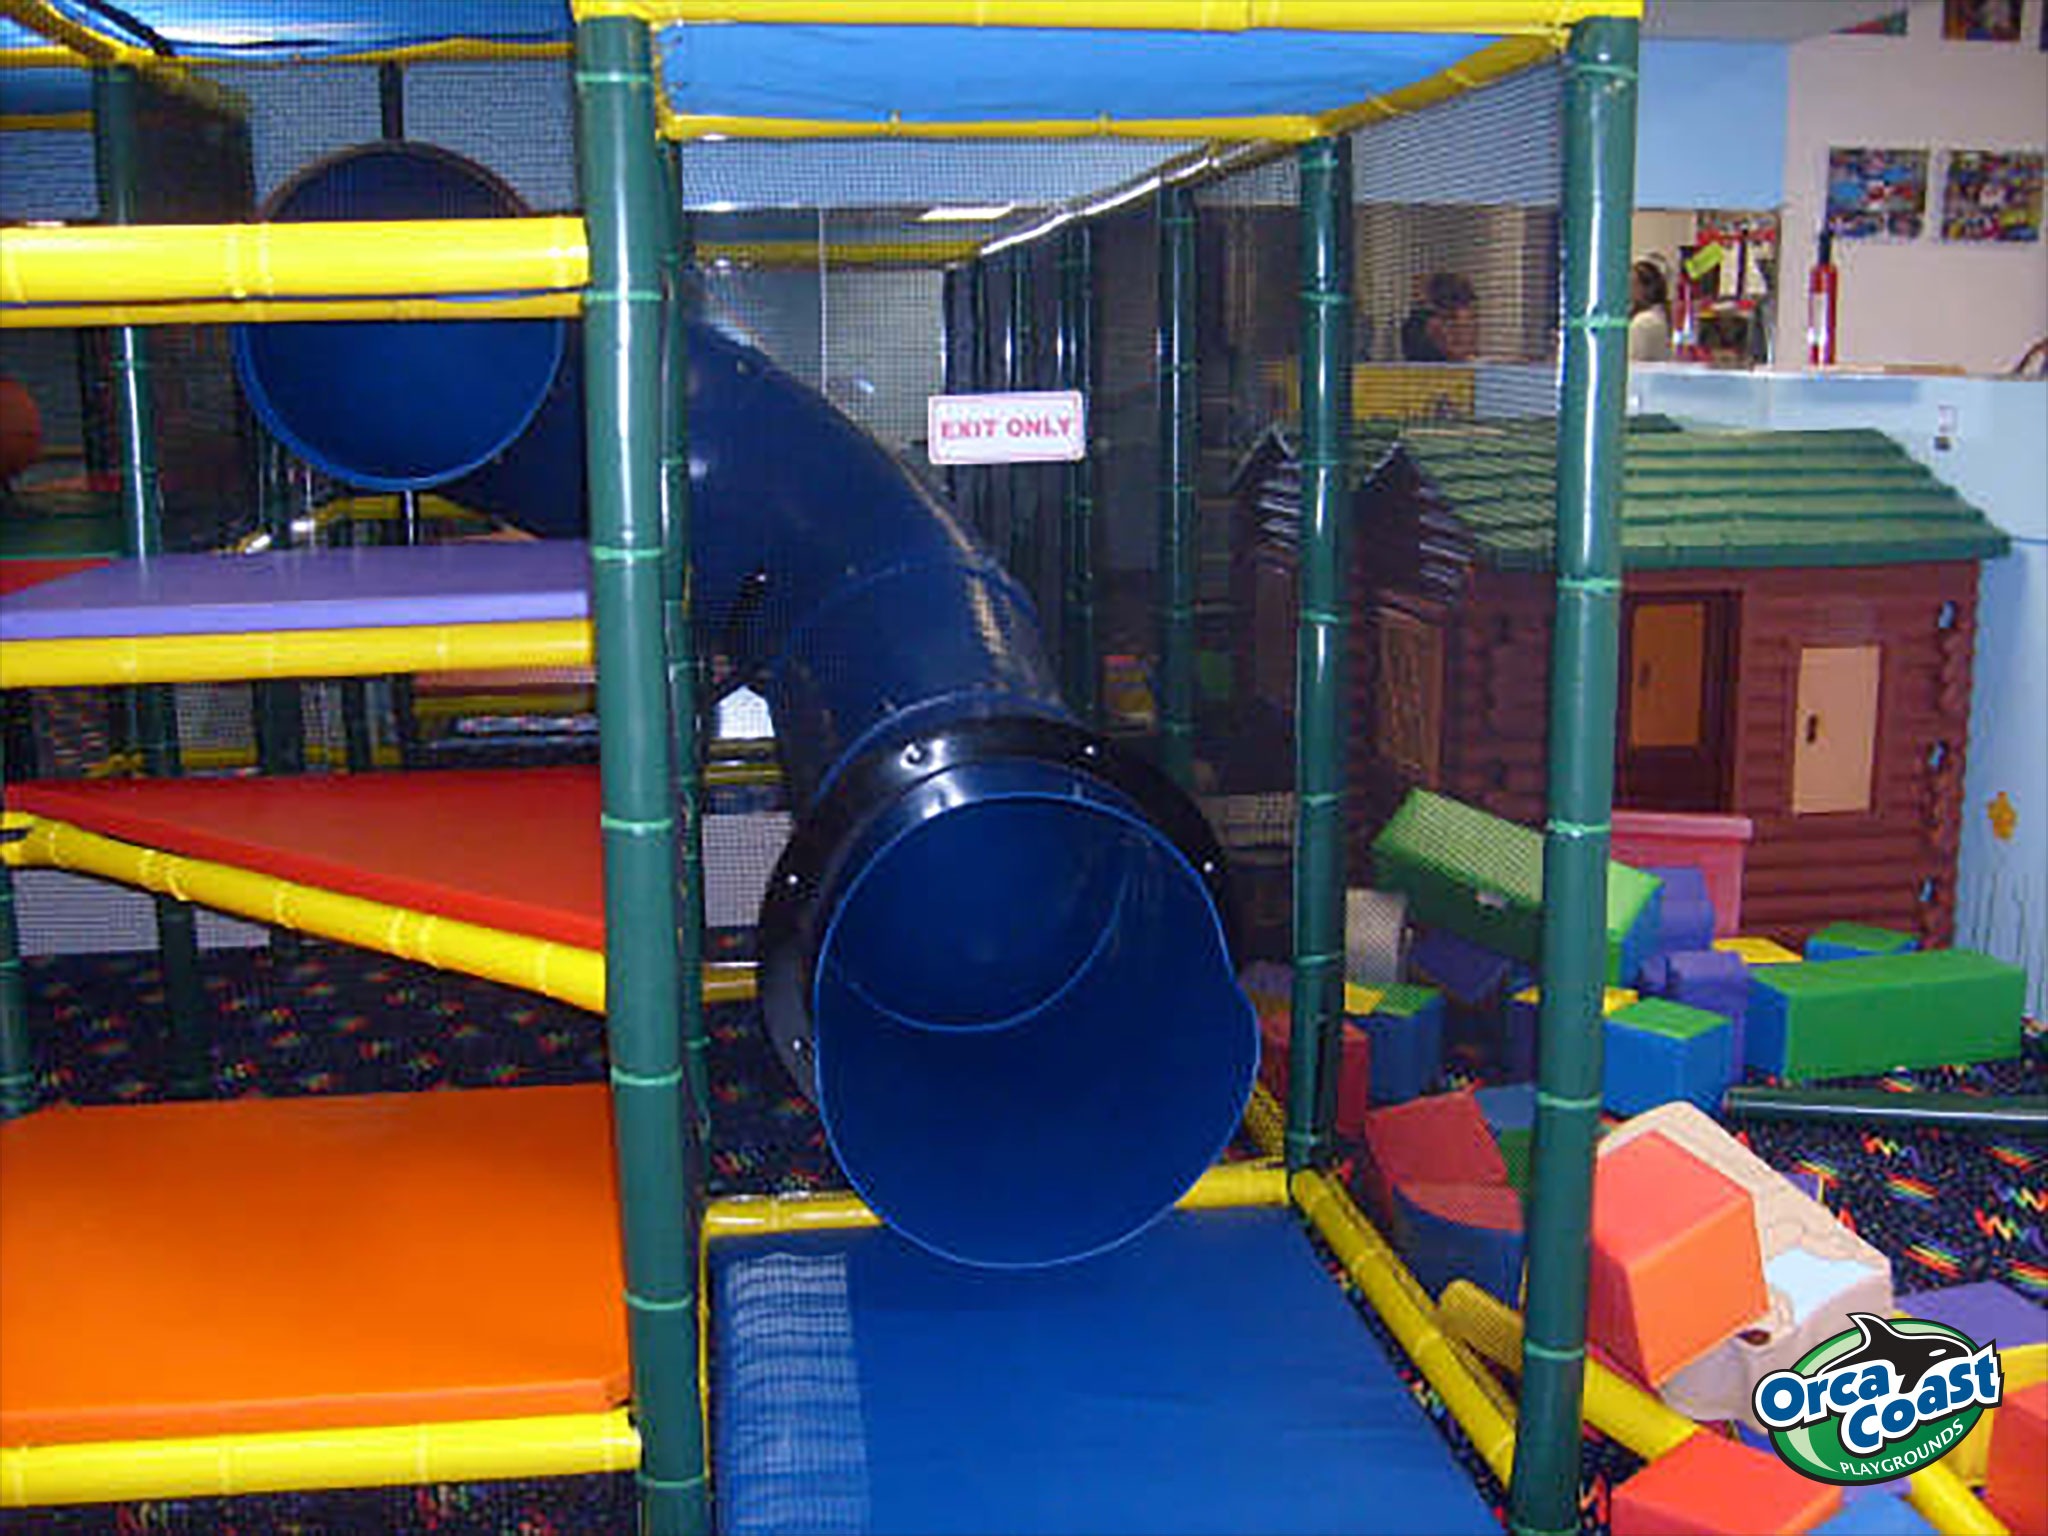 The Funplex, a toddler indoor playground in East Hanover, NJ